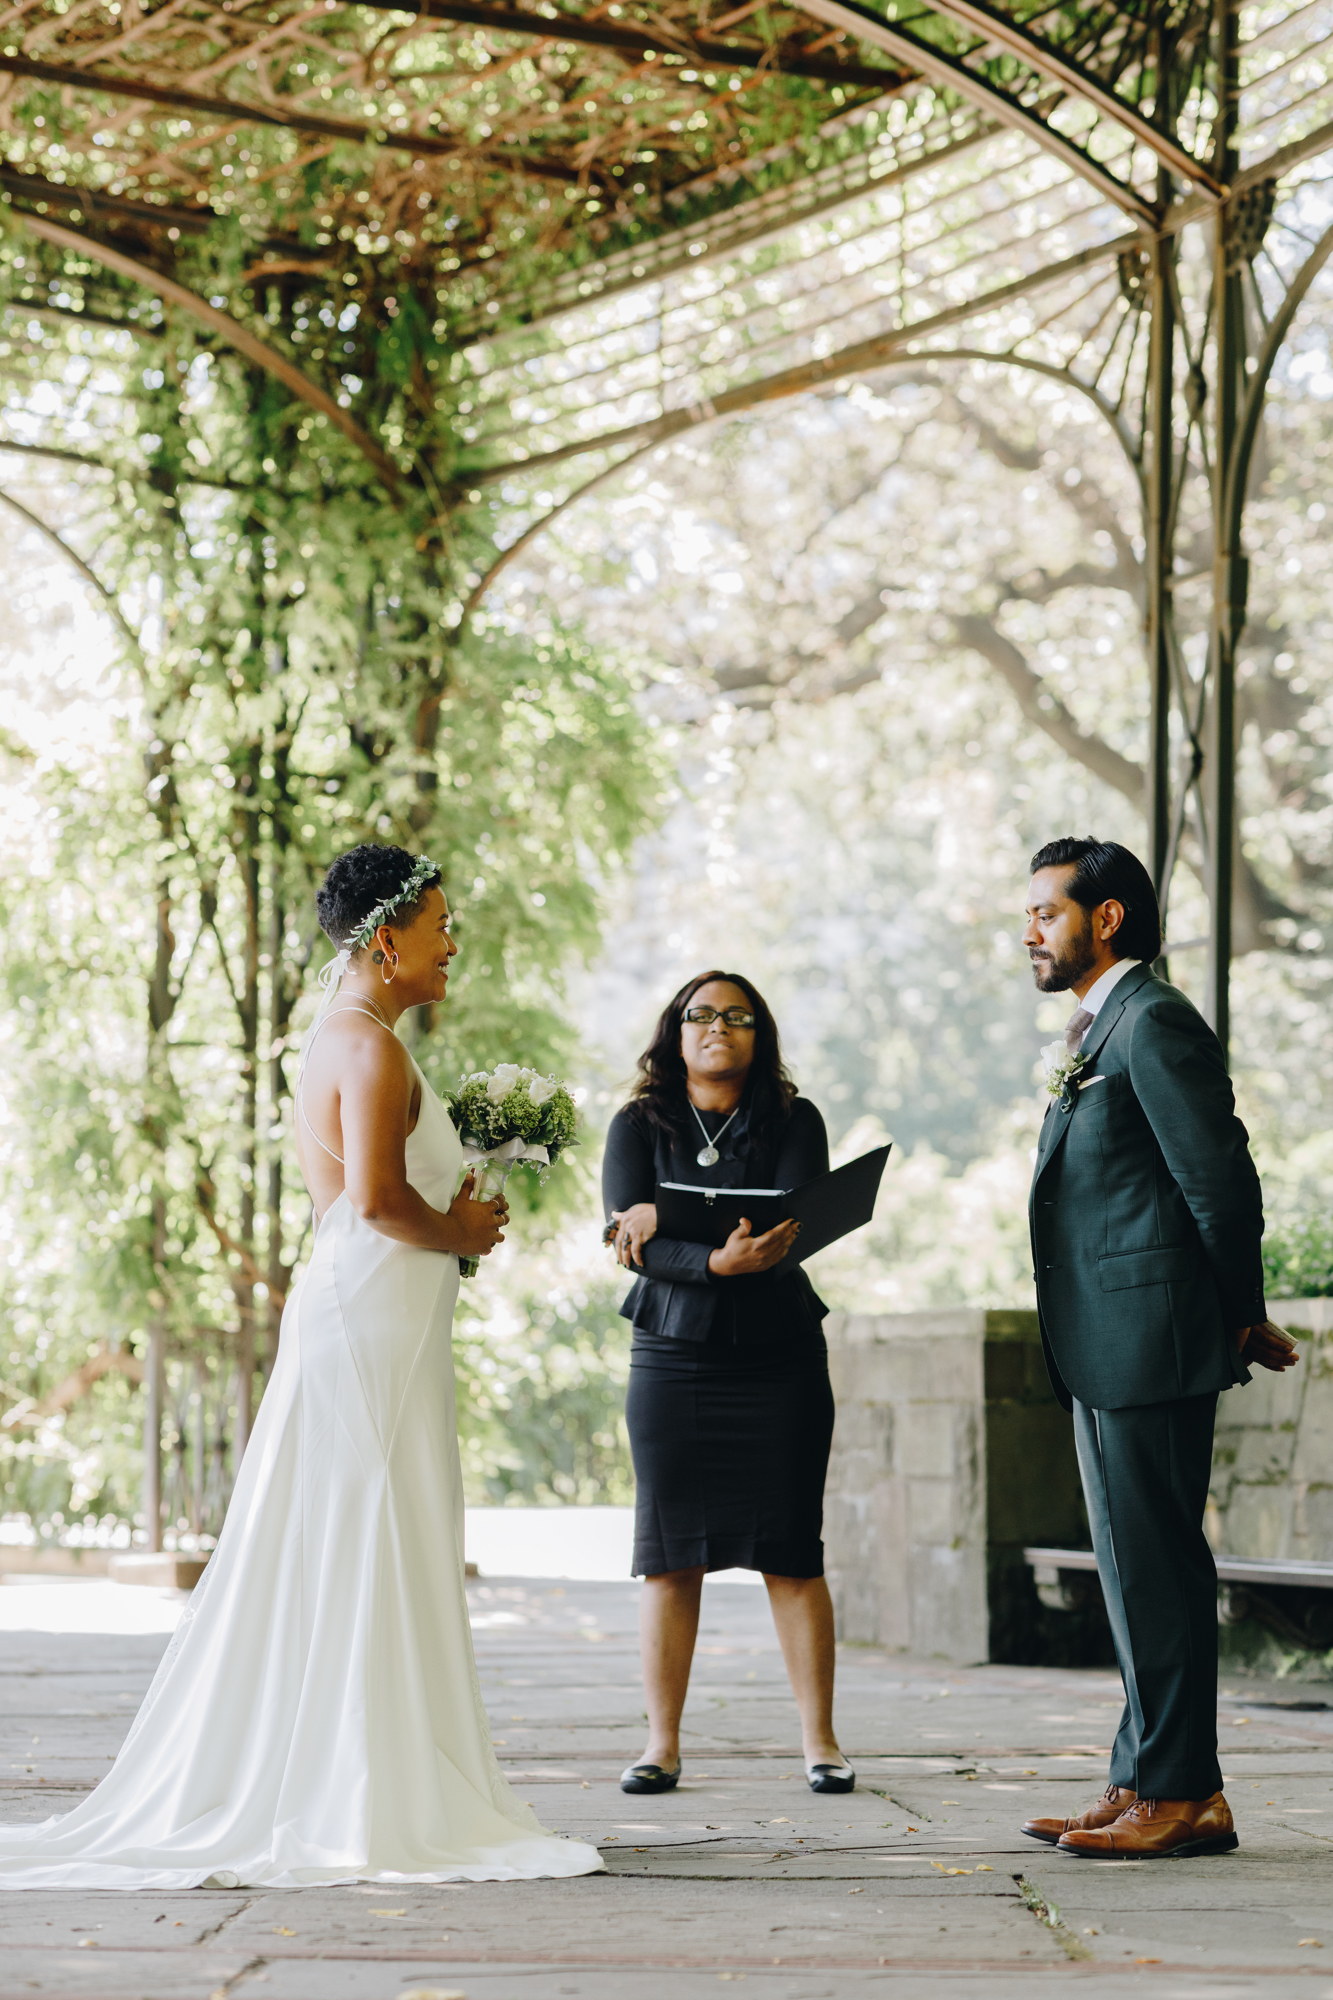 Intimate NYC wedding at Conservatory Garden